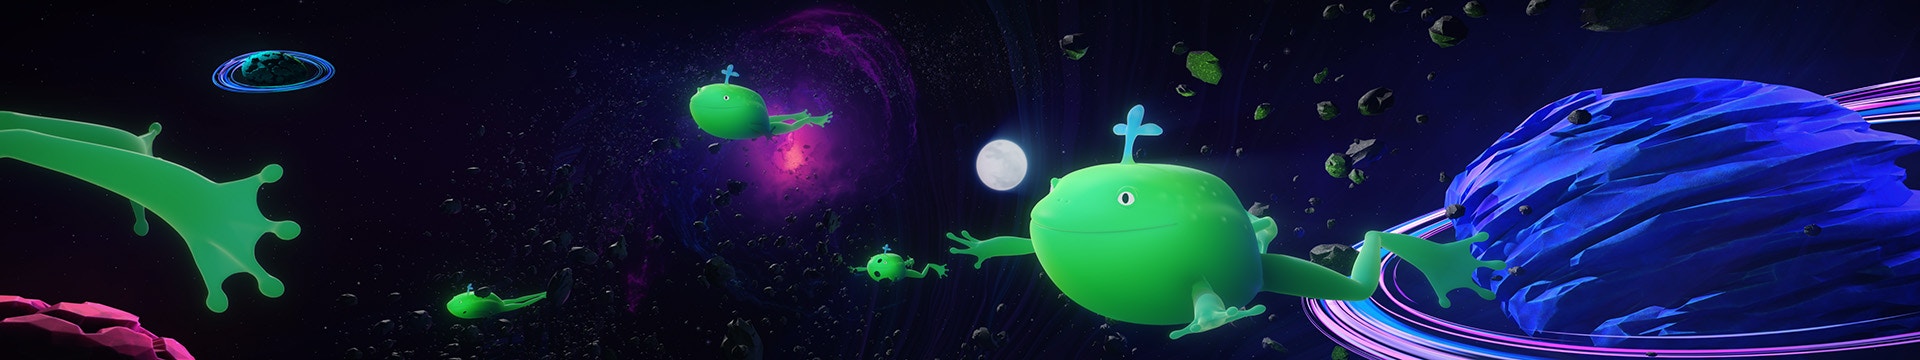 Space frogs swimming in a meteor shower close to a blue planet.